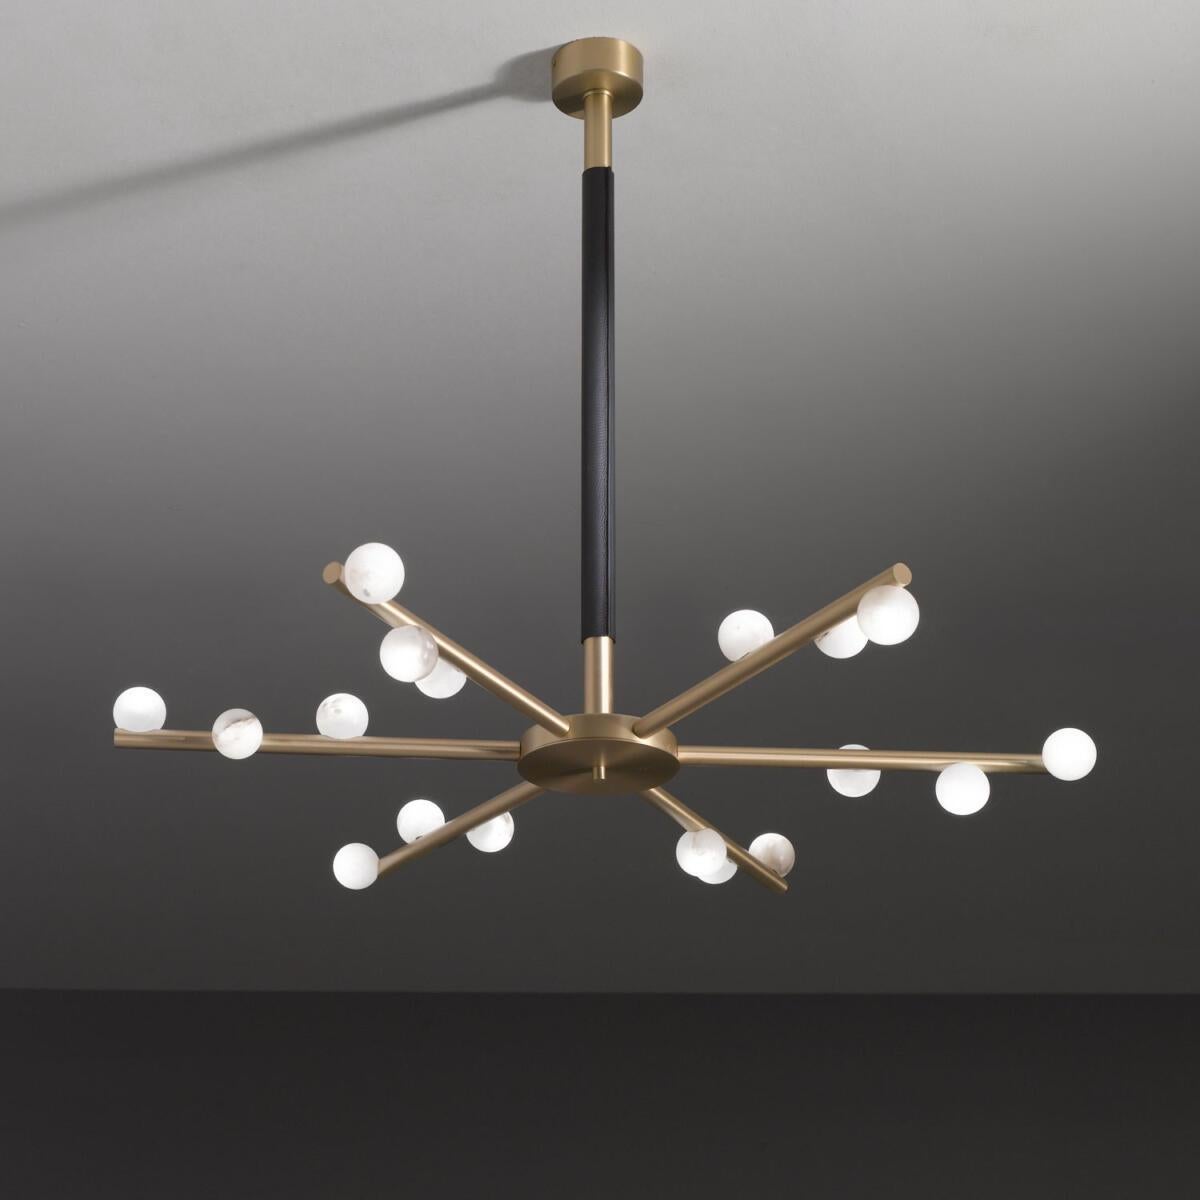 Demetra Brushed Brass Chandelier by Alabastro Italiano
Dimensions: D 97 x H 82 cm
Materials: Italian white alabaster, Italian hand wrought iron, brushed brass, black Africa leather
Other finishes available.
Light source 18 x LED 3 Watt, Tot. 5220